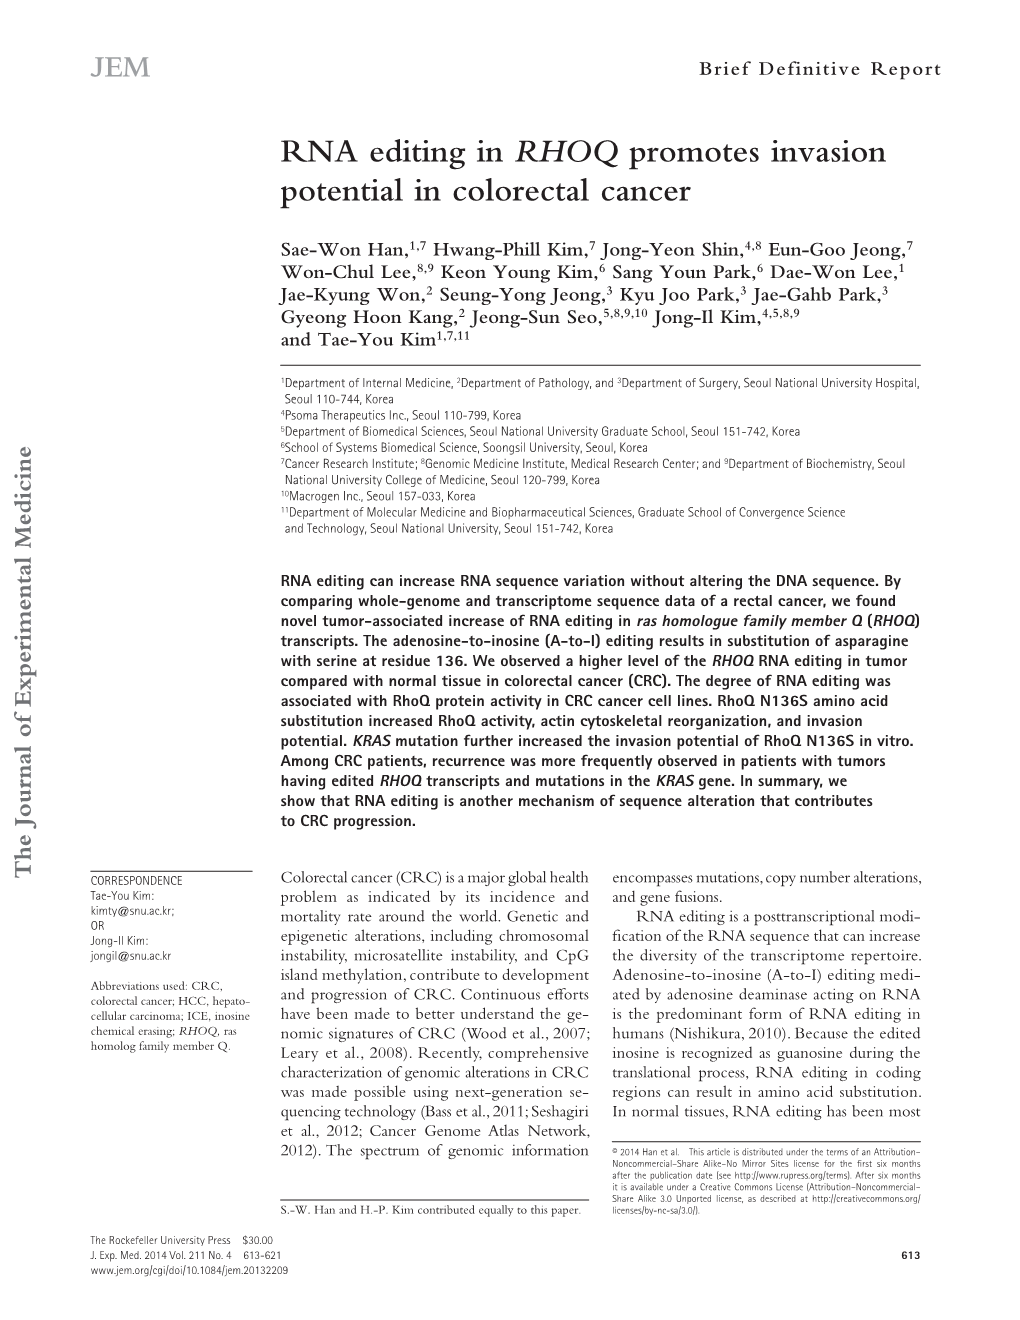 RNA Editing in RHOQ Promotes Invasion Potential in Colorectal Cancer